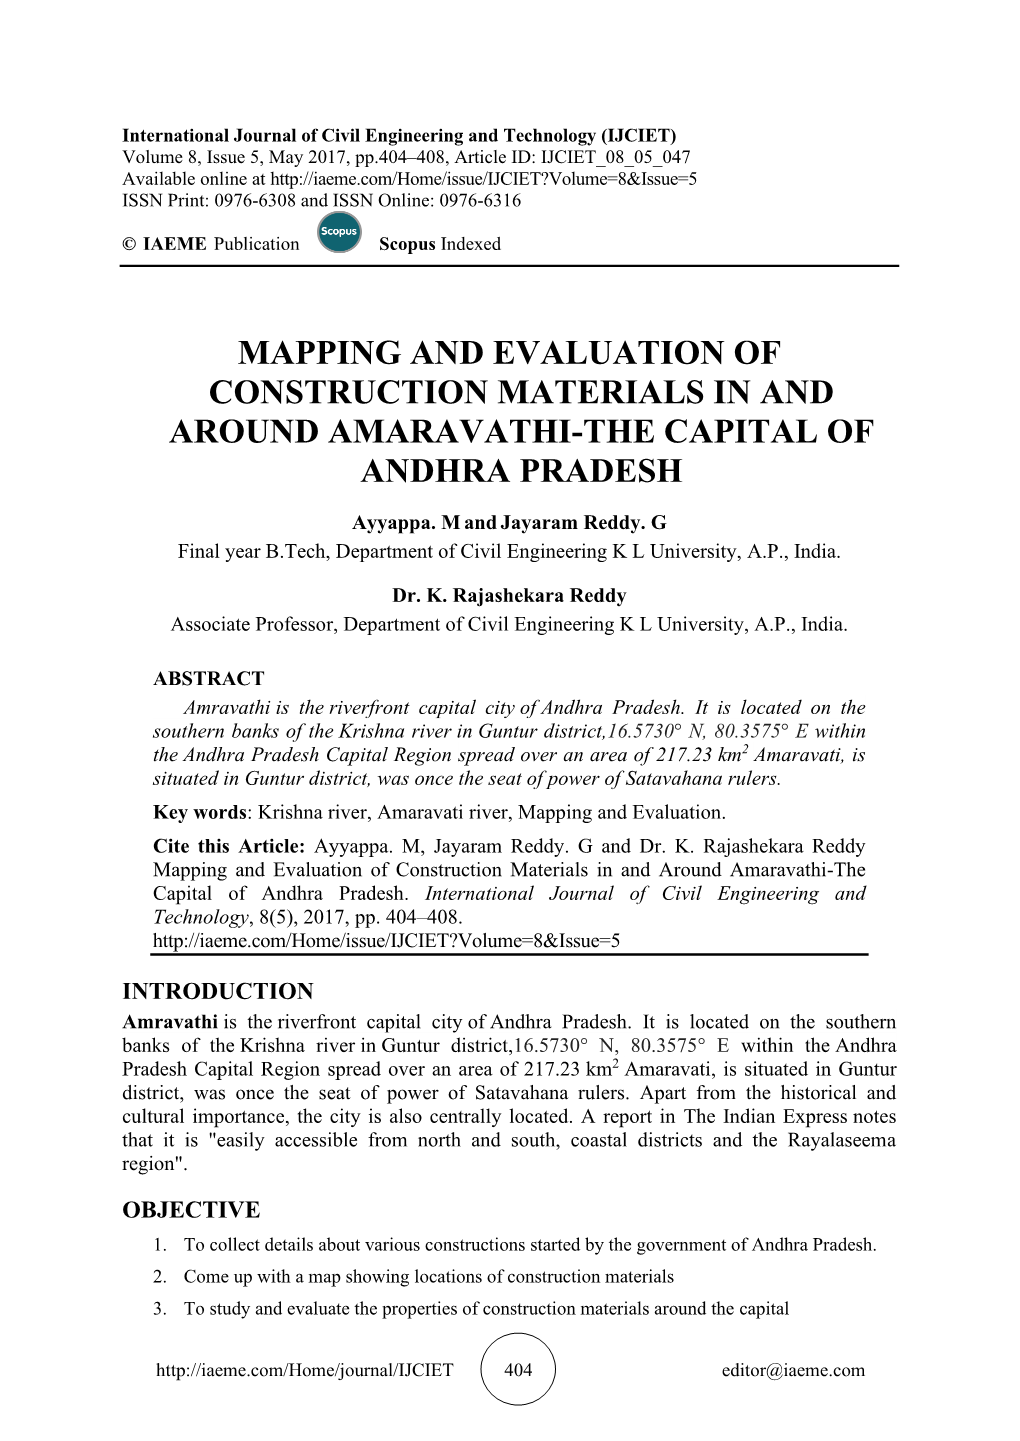 Mapping and Evaluation of Construction Materials in and Around Amaravathi-The Capital of Andhra Pradesh